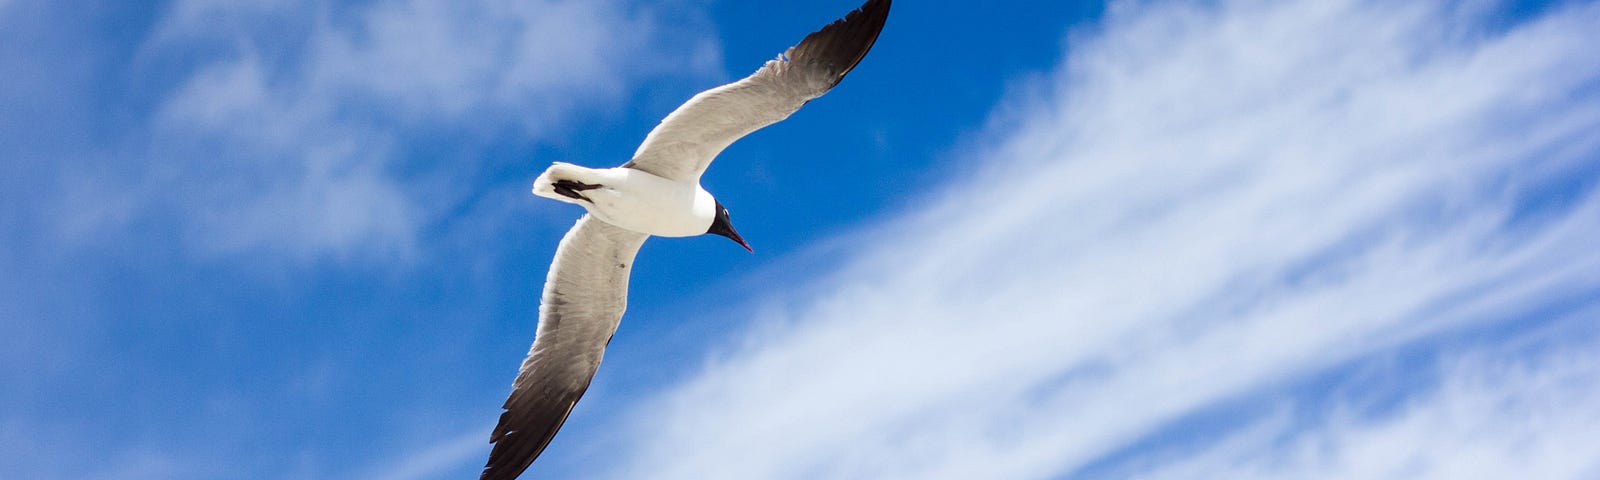 A black and white bird flying against a cloudy but blue sky.